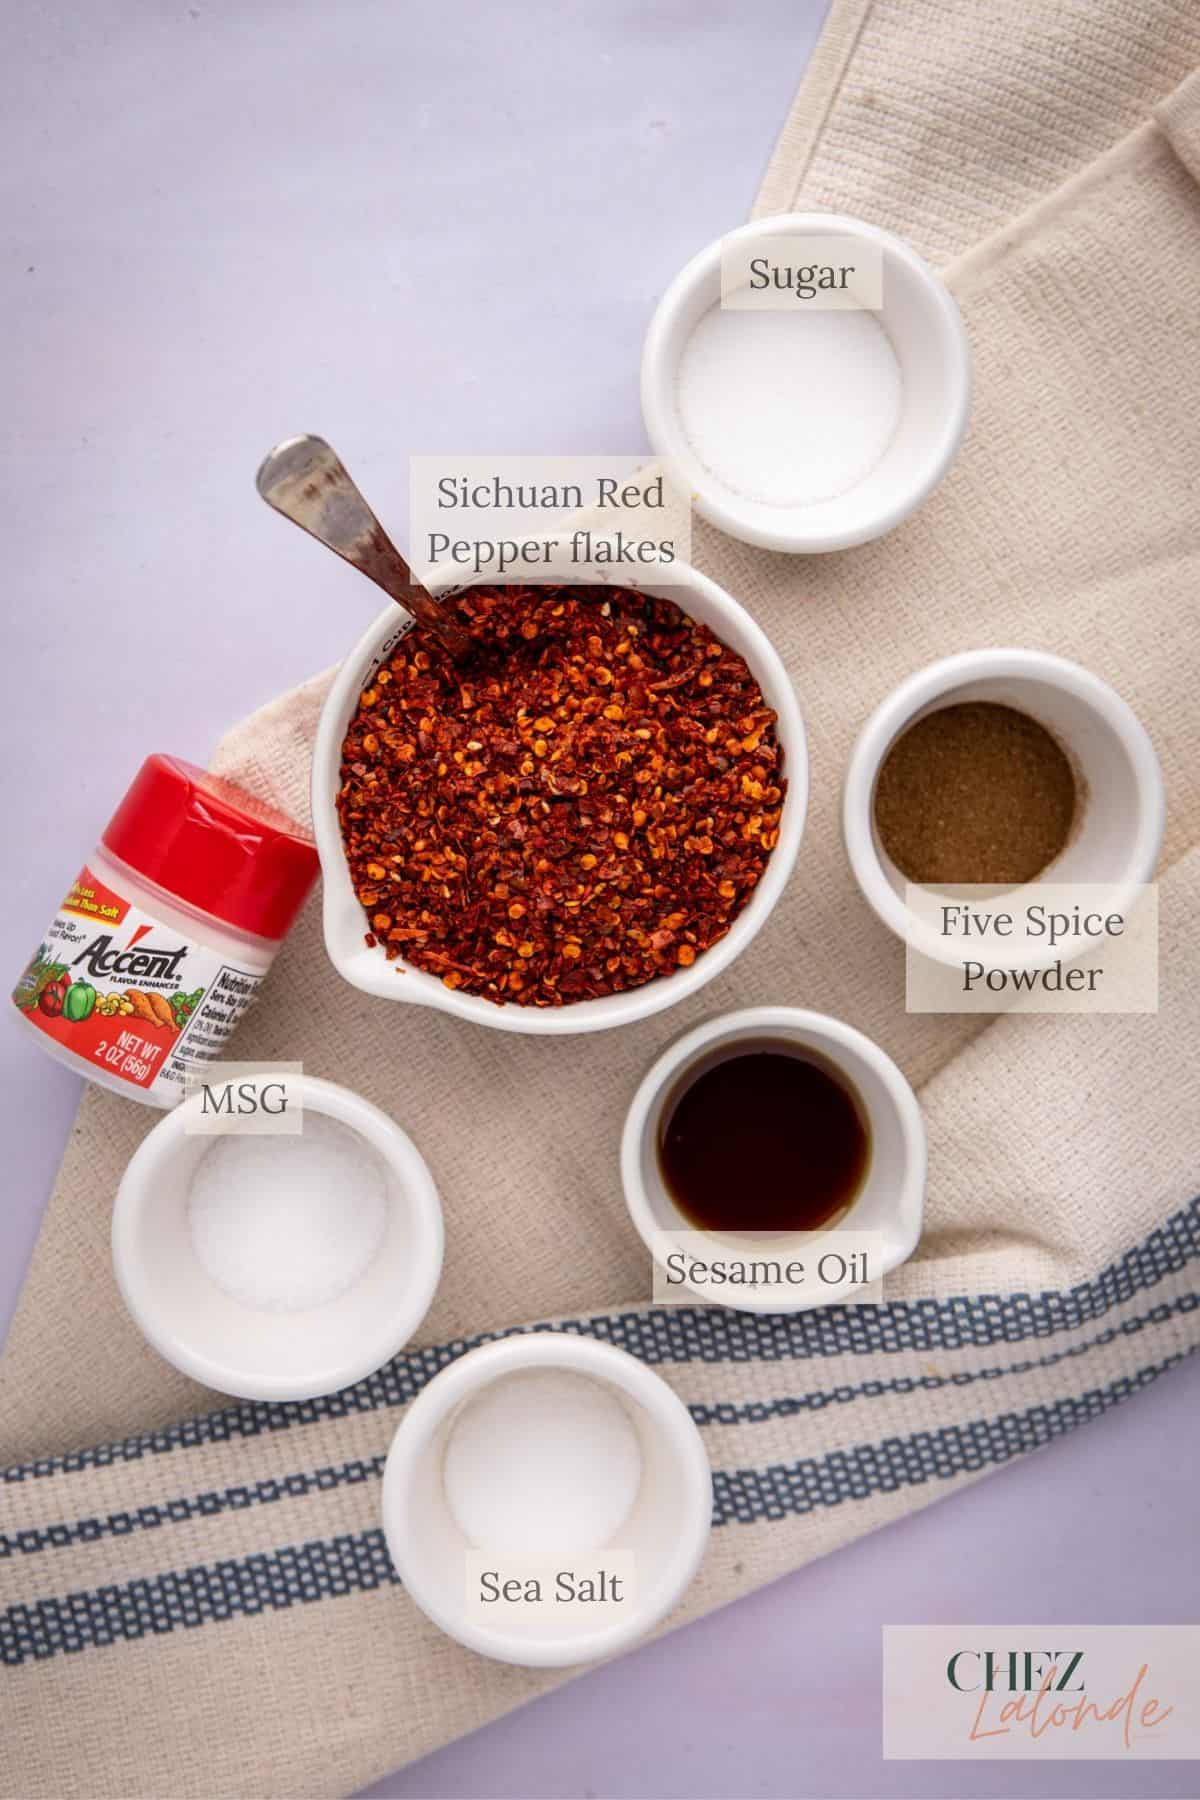 Group 2 ingredients needed for making Homemade chinese Chili Oil. You will need sichuan red pepper flakes, sugar, sea salt, toasted sesame oil, five spice powder, and MSG.